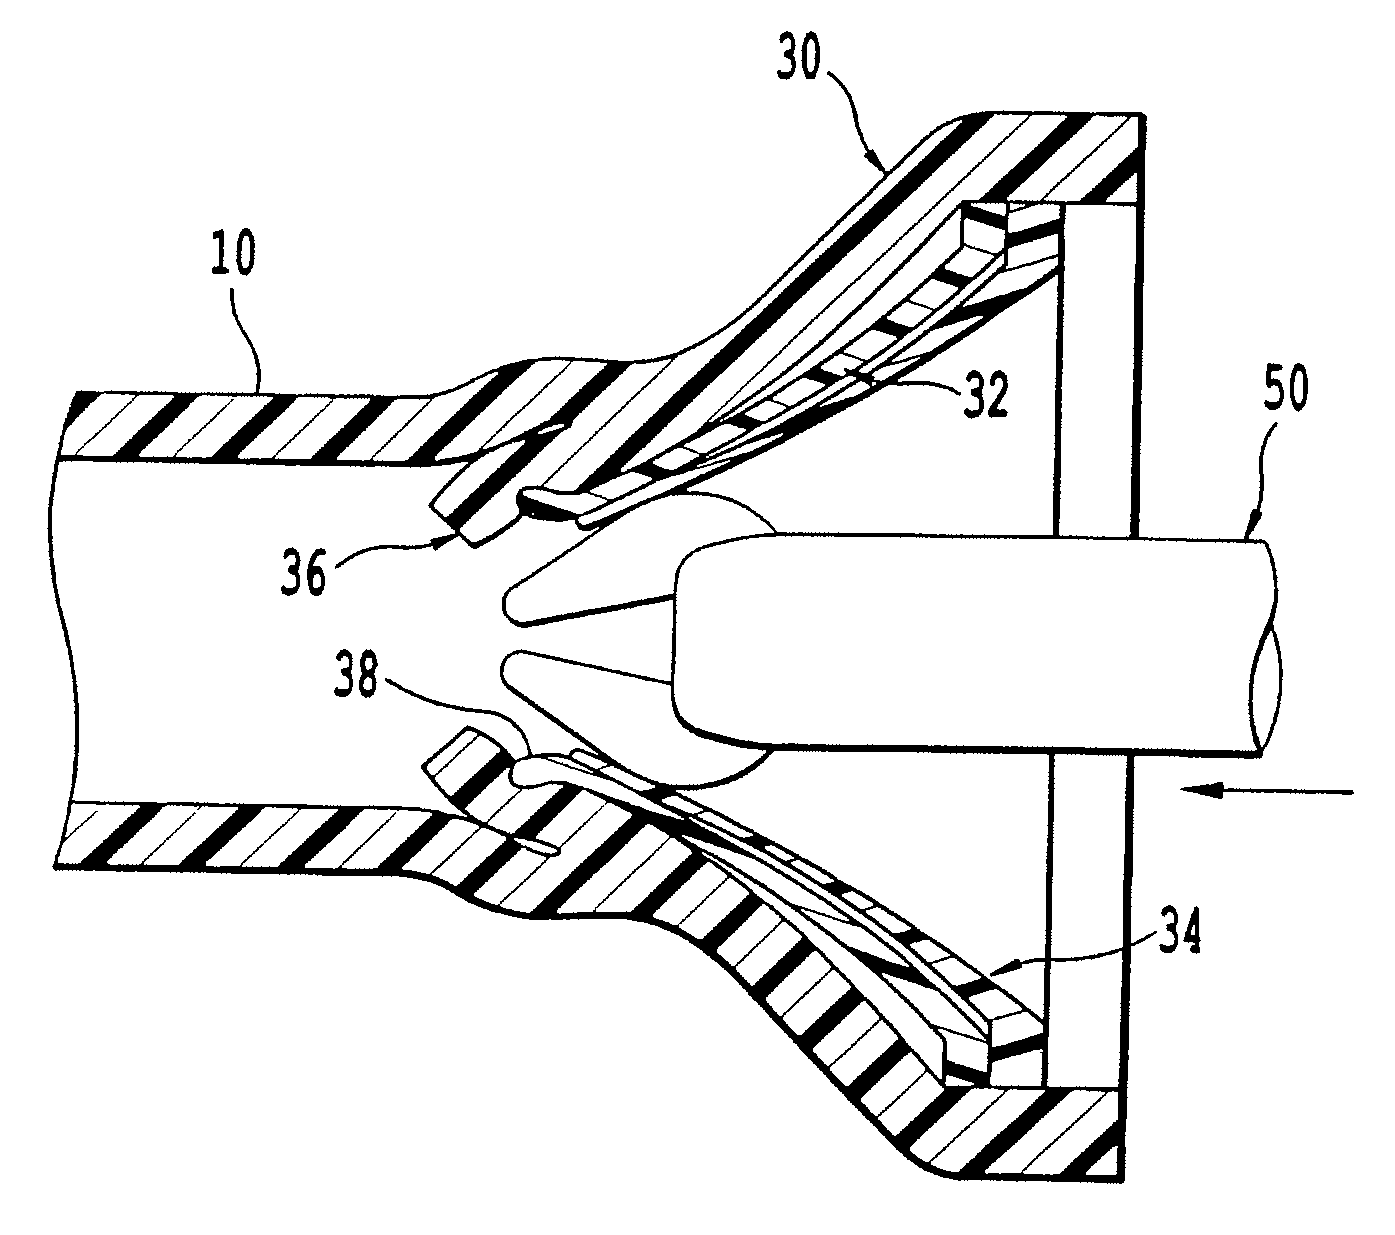 Double-cone sphincter introducer assembly and integrated valve assembly